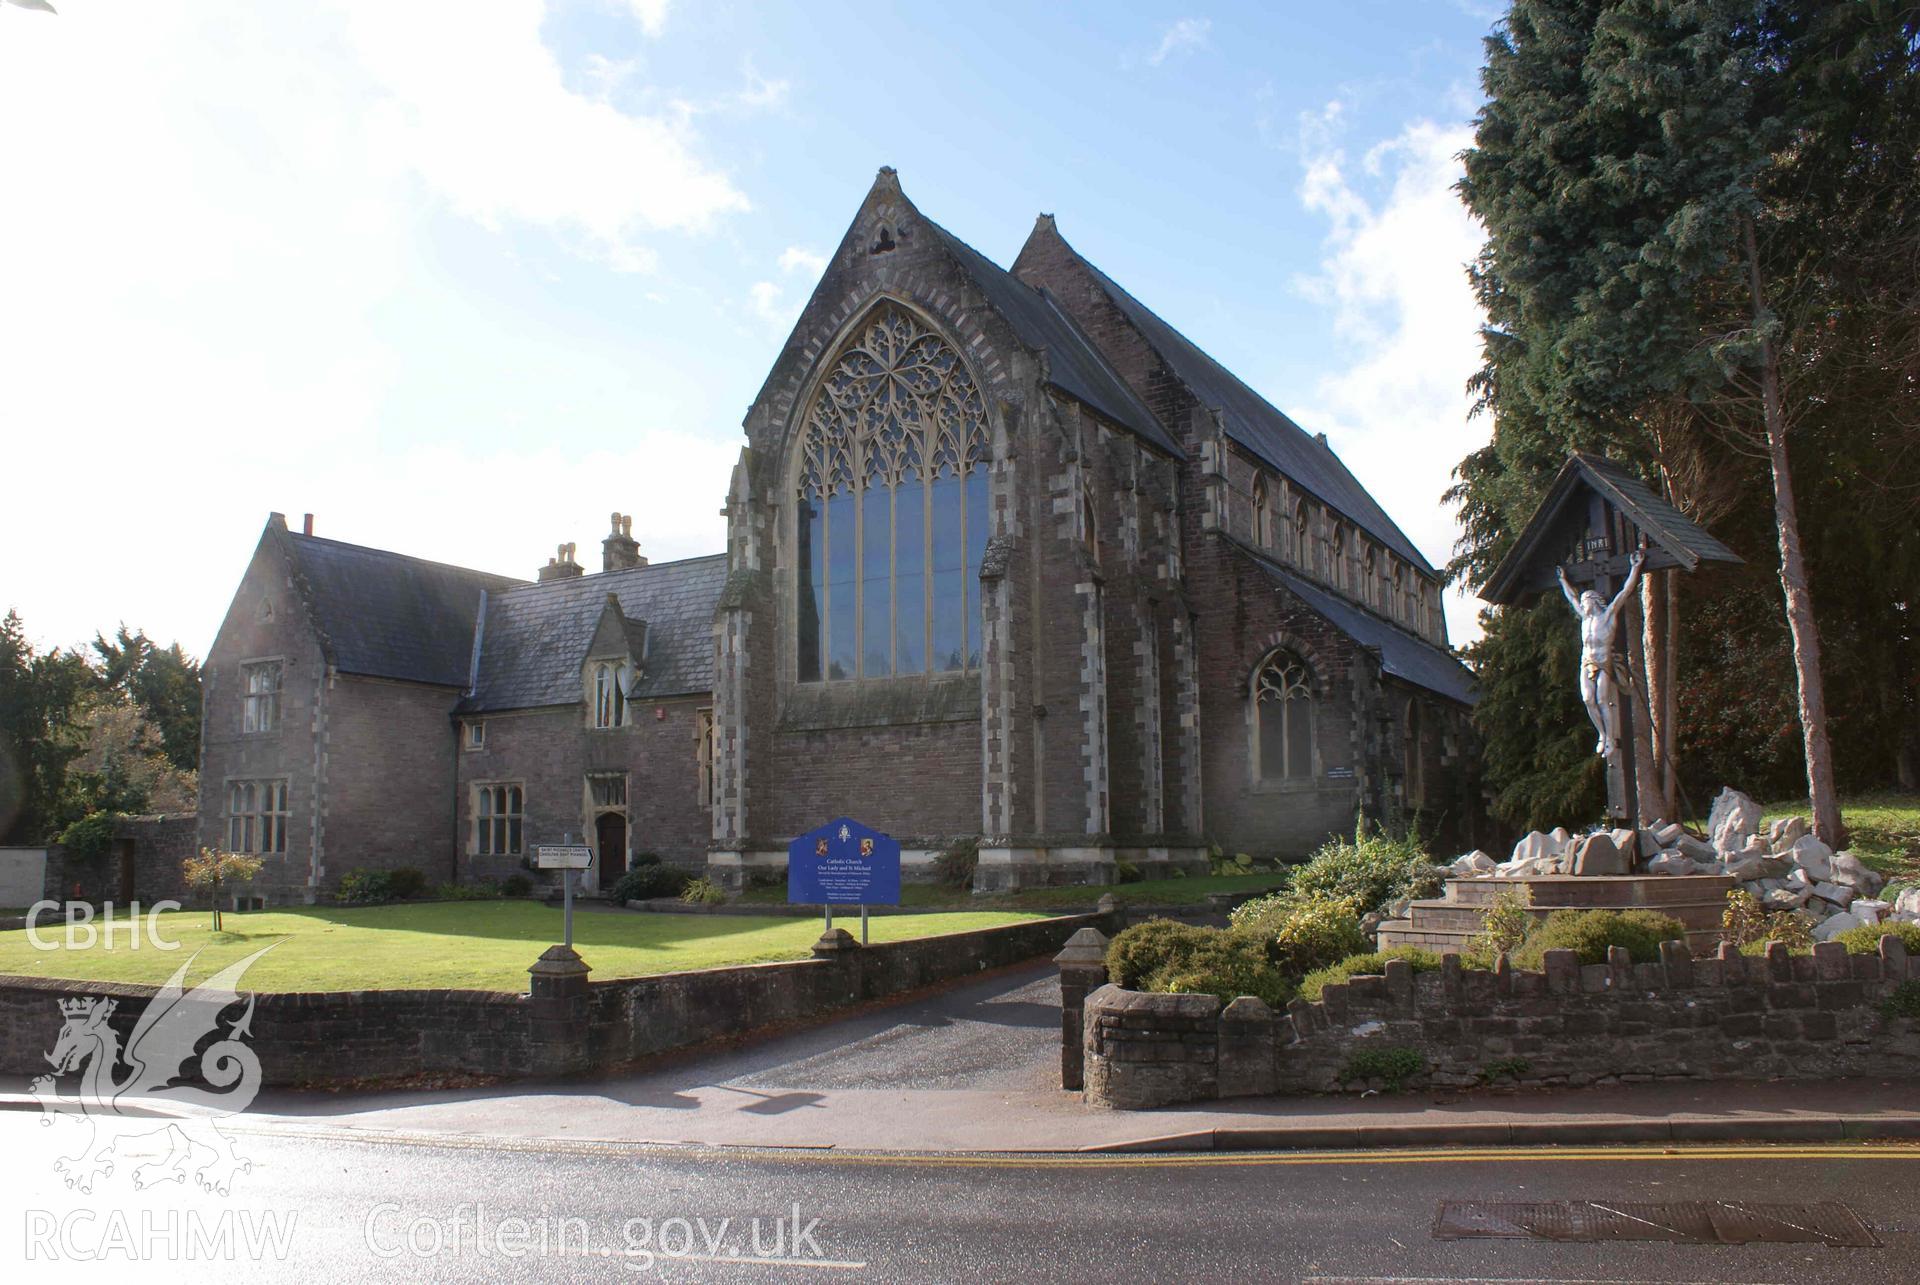 Digital colour photograph showing exterior of Our Lady and St Michael Catholic church, Abergavenny.